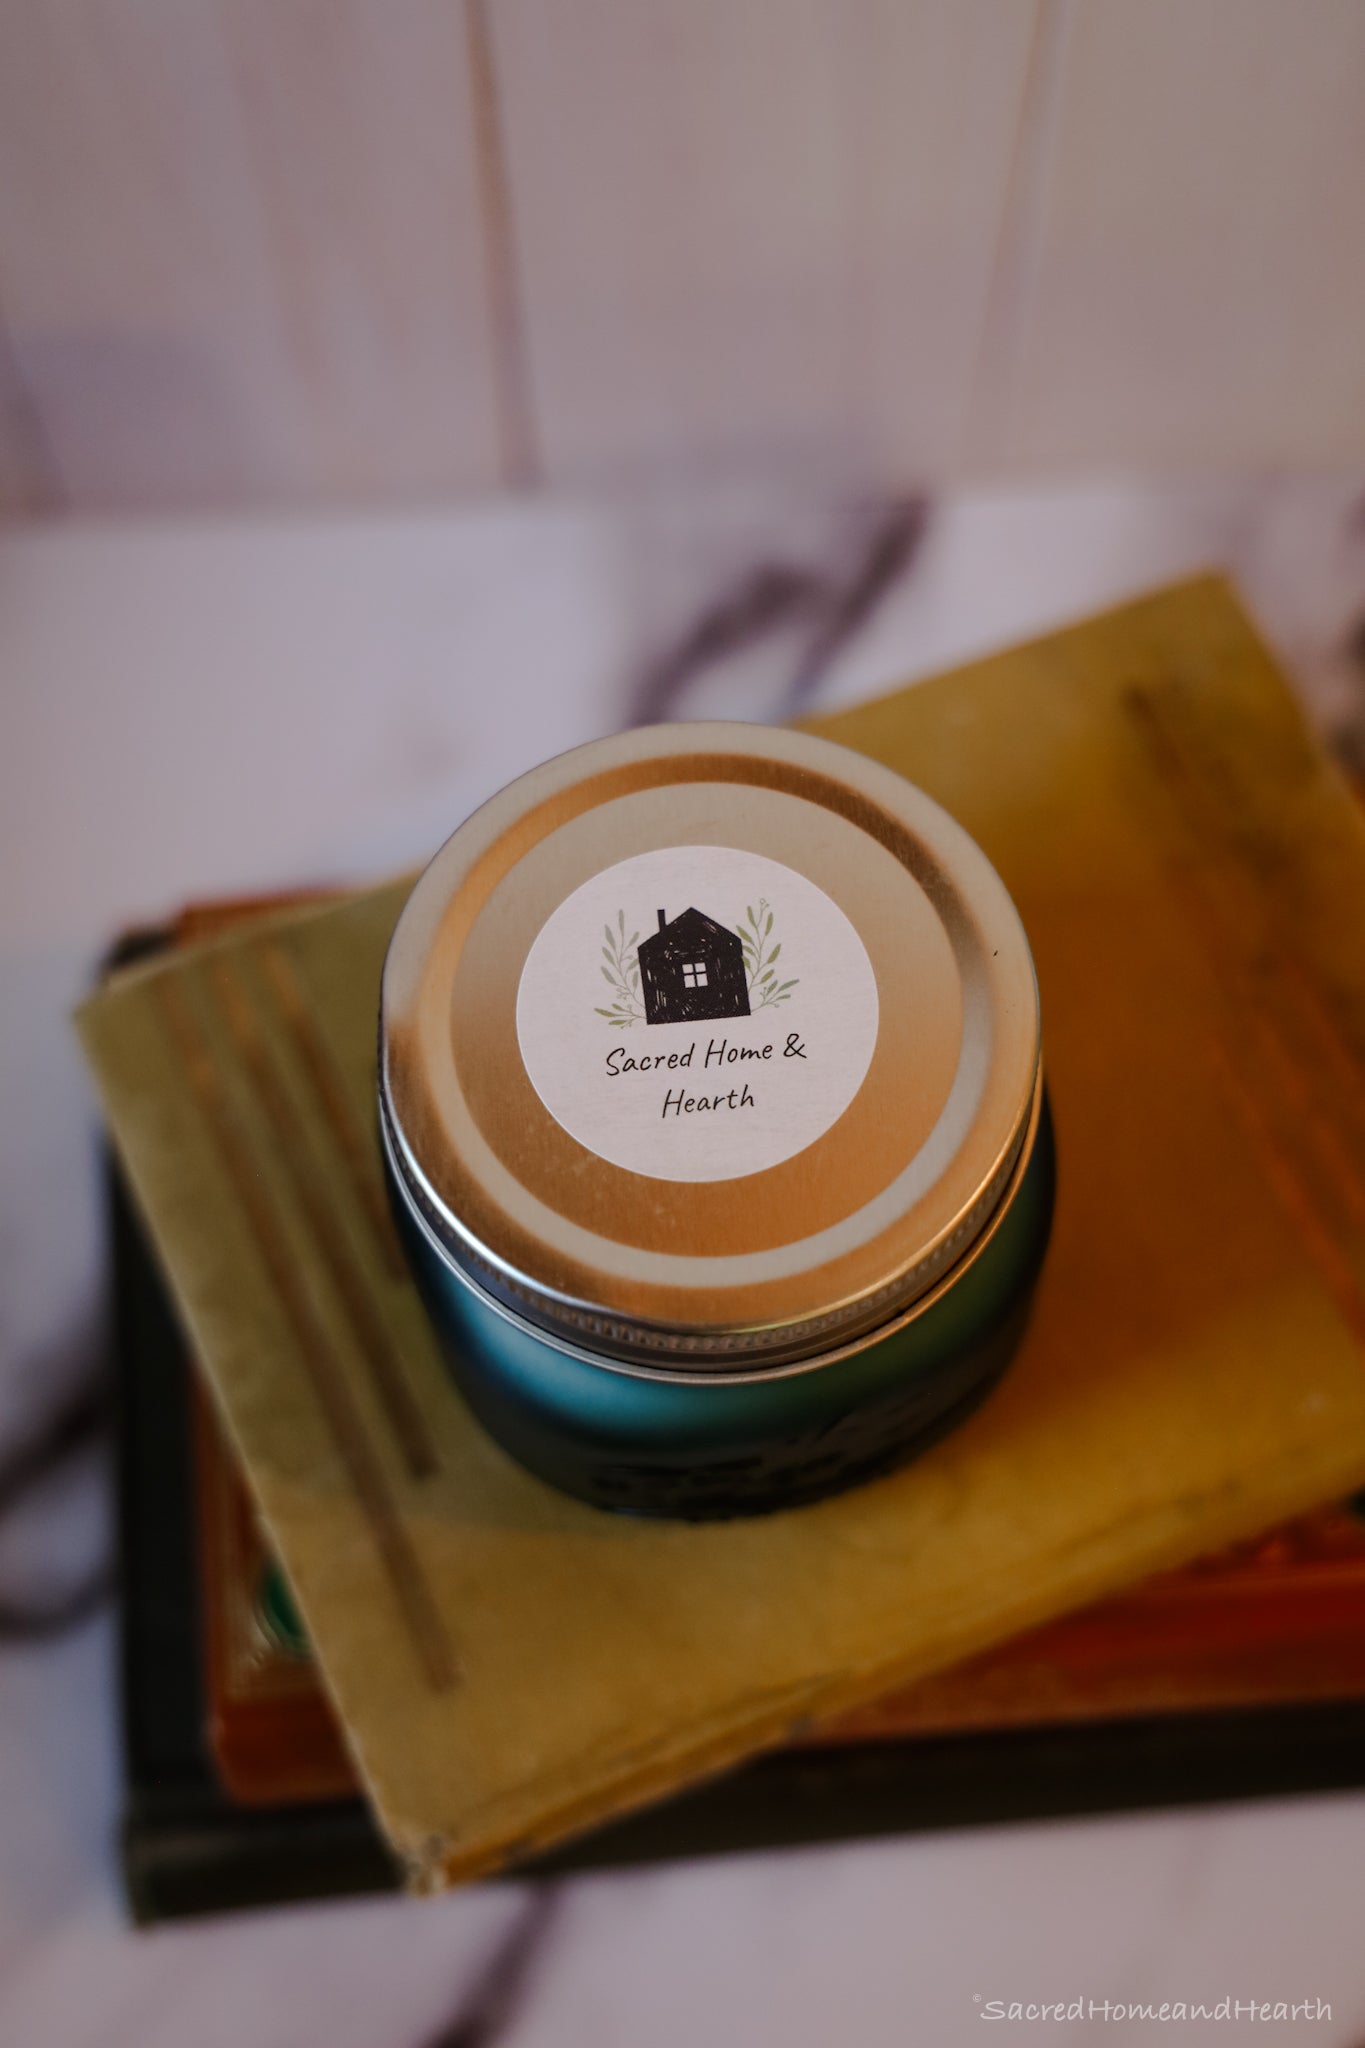 Spiced Apple Cider Candle